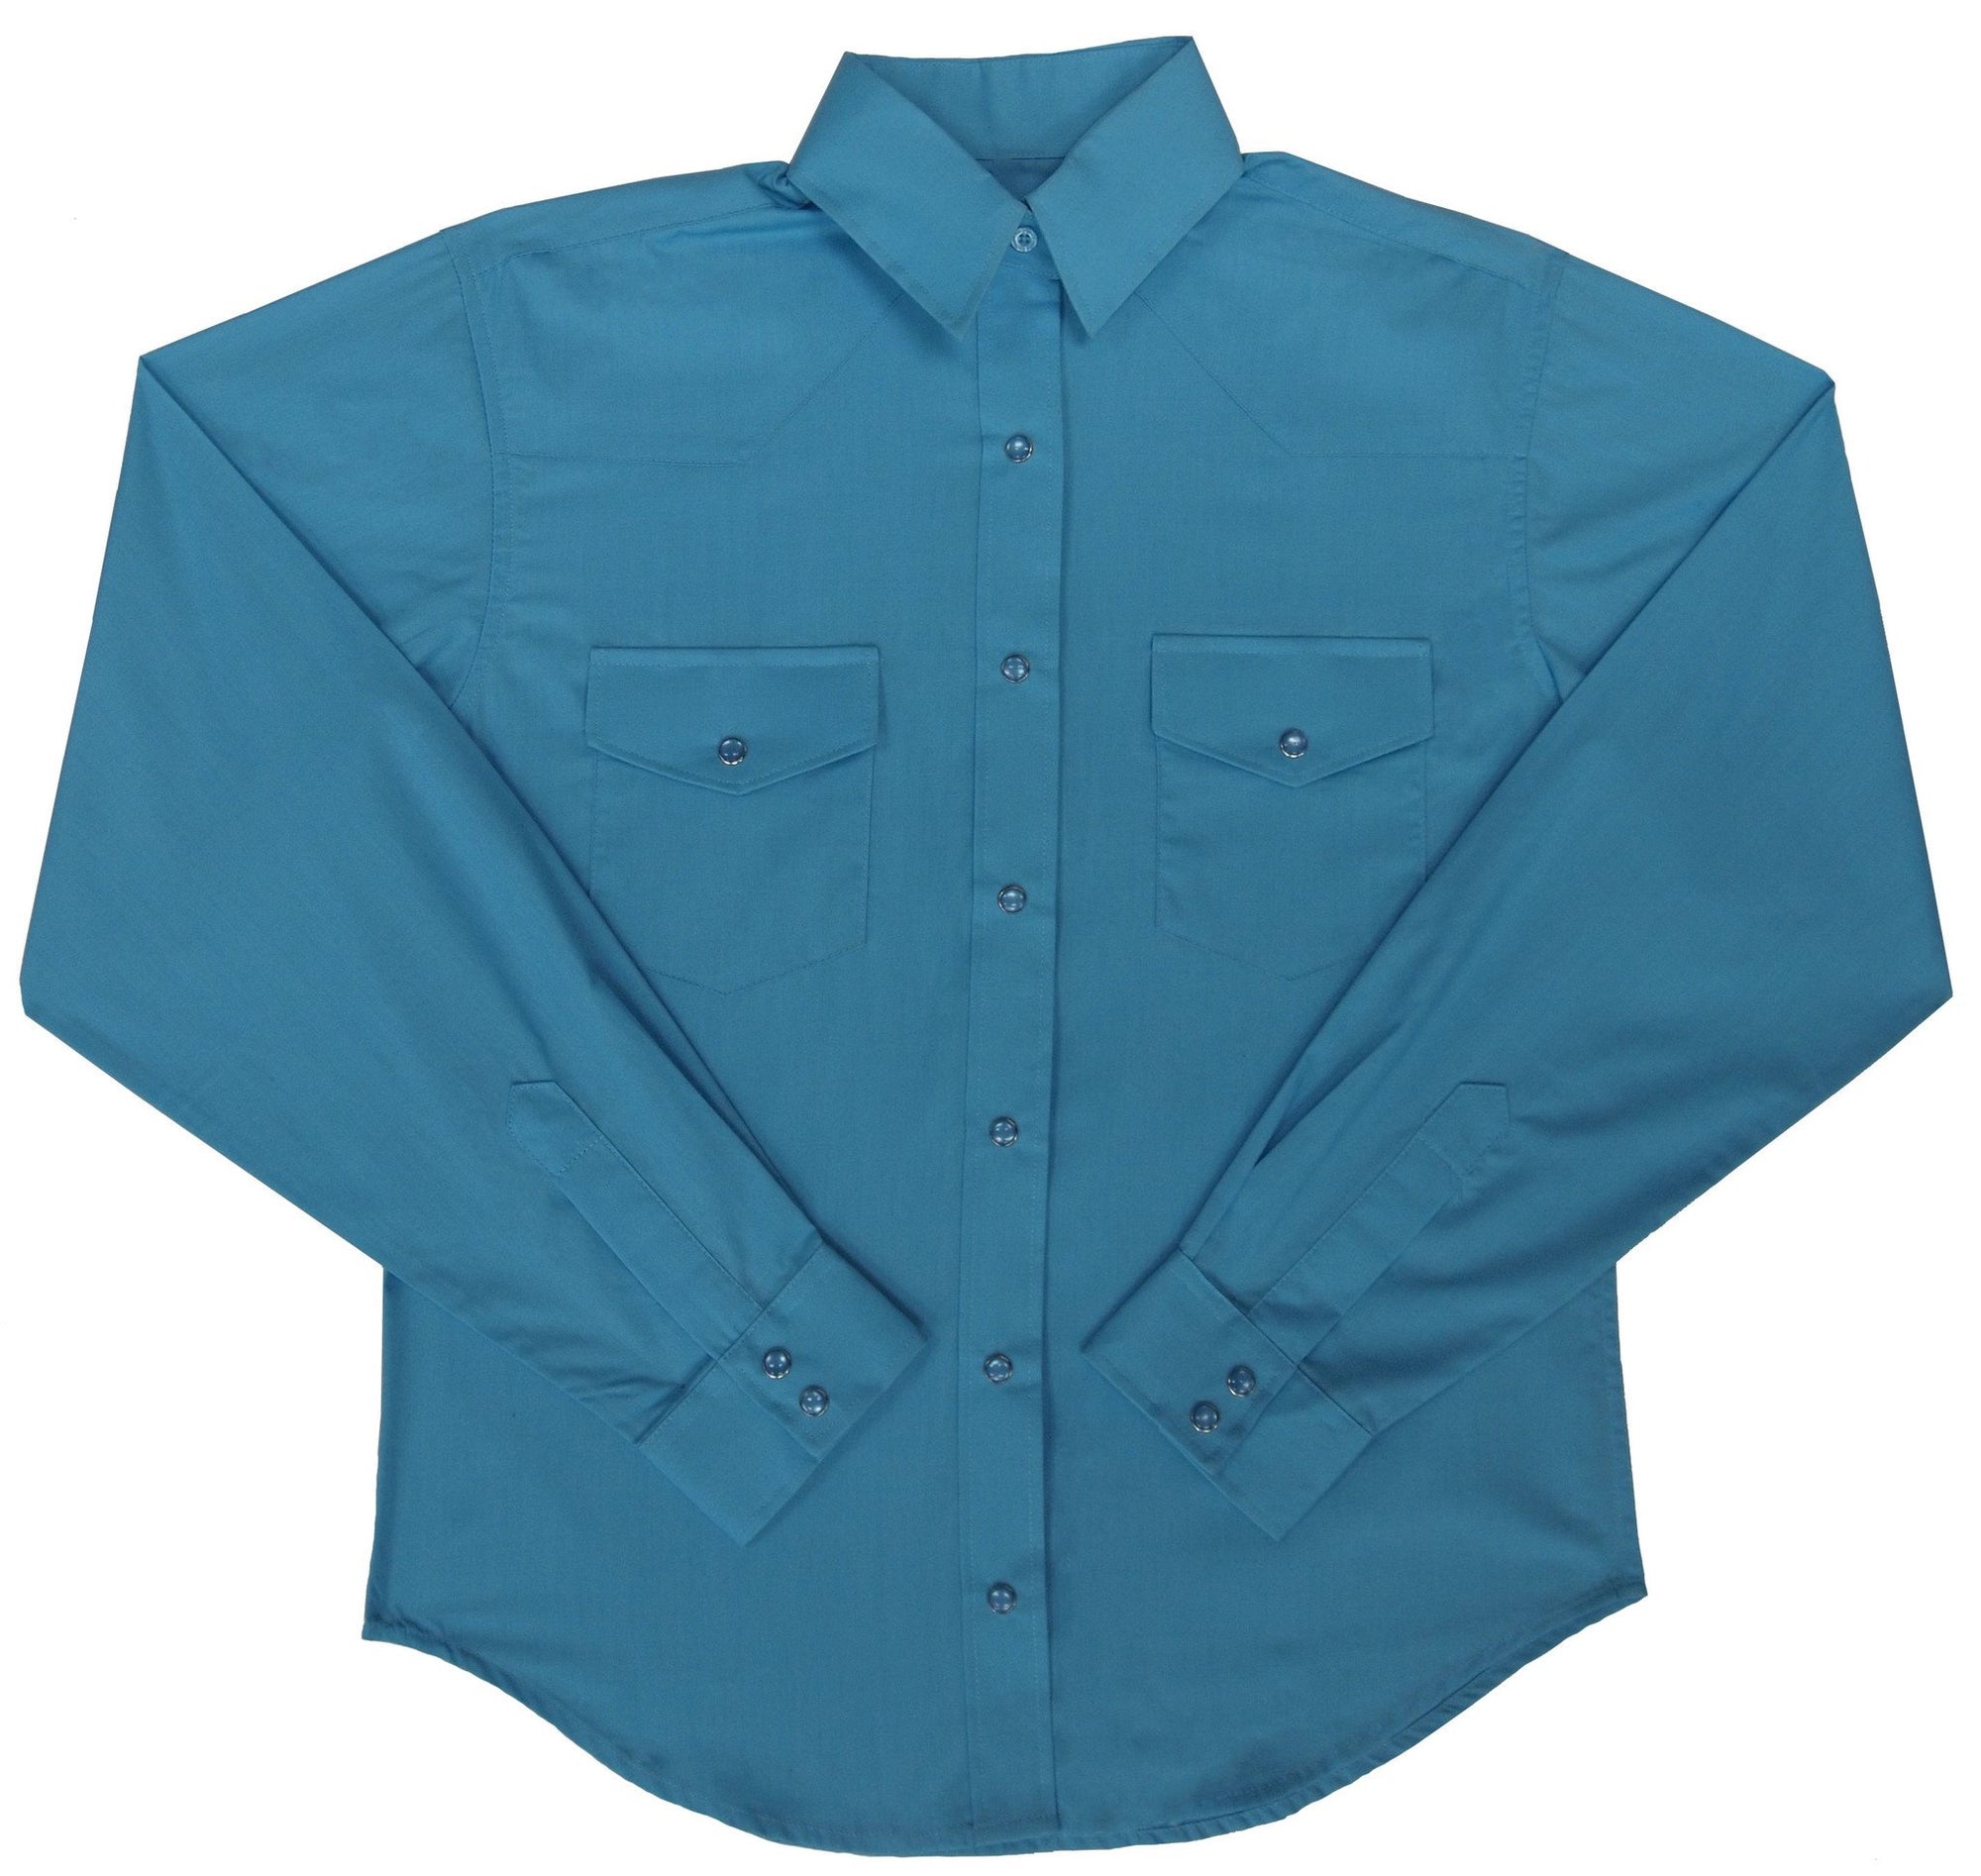 White Horse Apparel Women's Western Shirt Turquoise